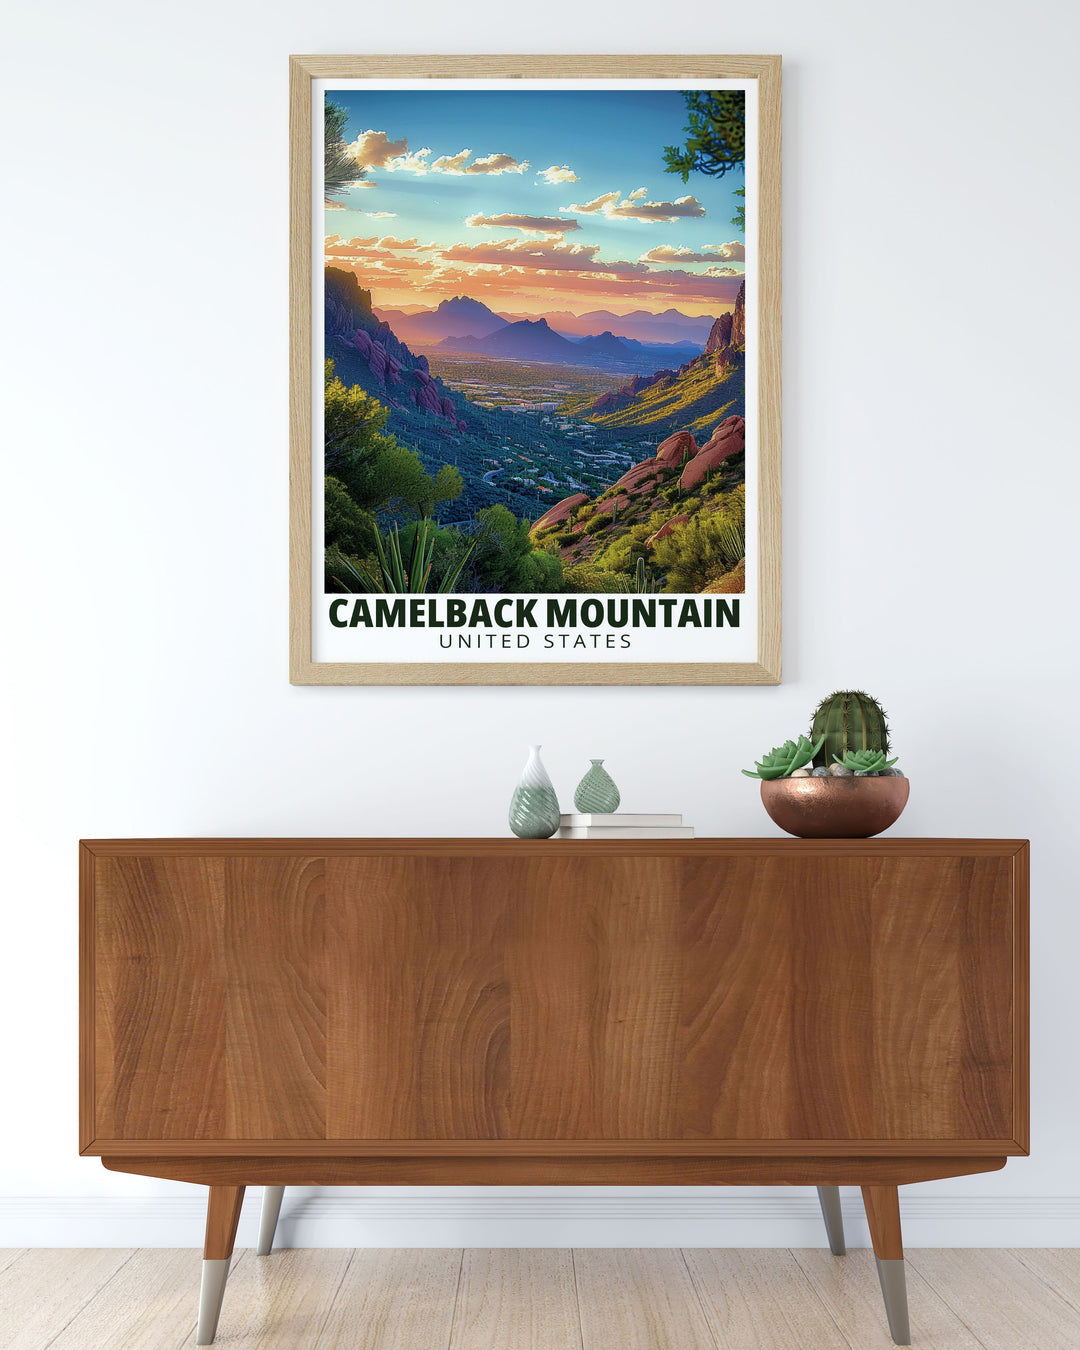 Experience the charm of Arizona with this Echo Canyon Trail travel poster featuring the iconic Mt. Camelback. This Arizona poster is a perfect addition to any home or office decor offering a piece of the beautiful Arizona scenery to enhance your living space.